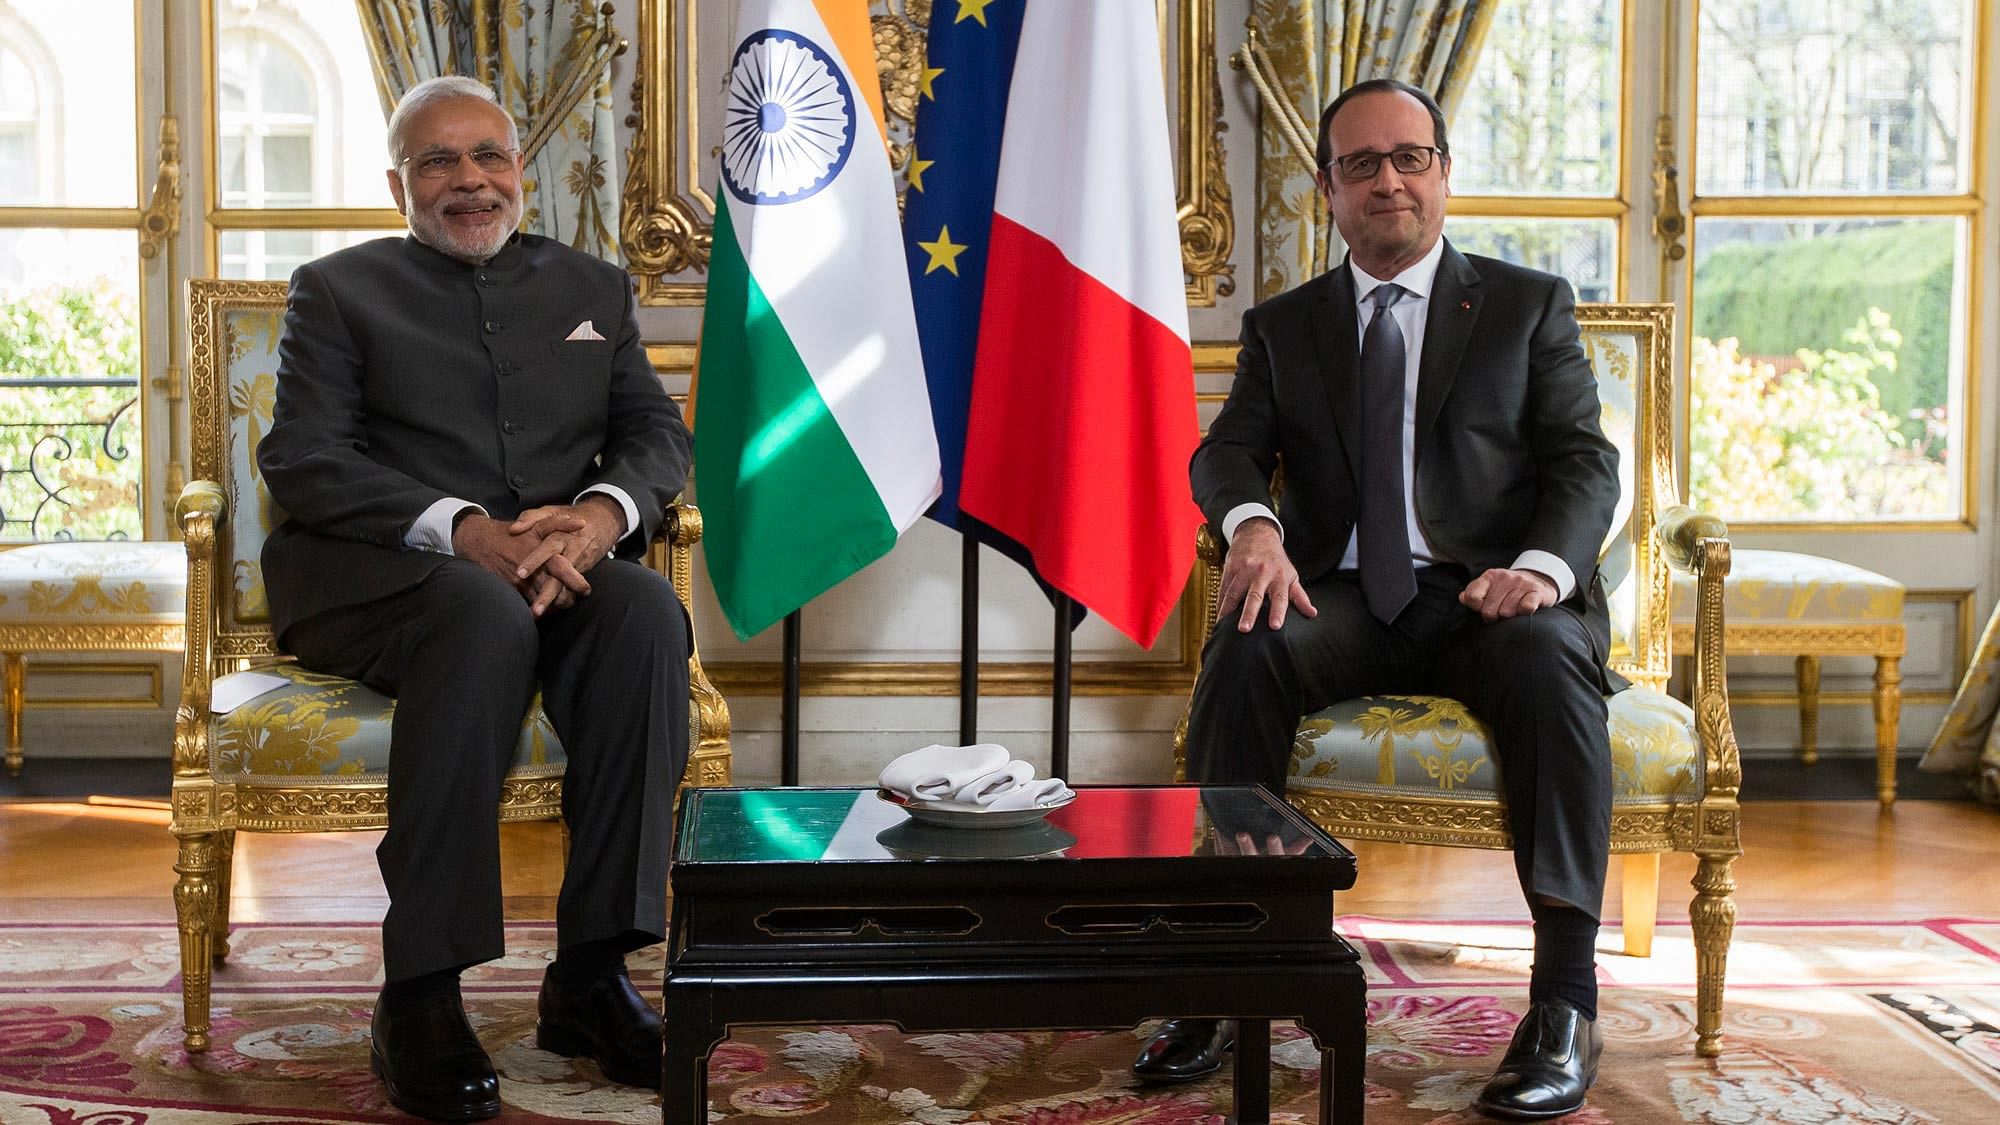 Prime Minister Narendra Modi (L) with French President Francois Hollande (R) at the Elysee Palace in Paris, France, 10 April 2015. (Photo: Reuters)